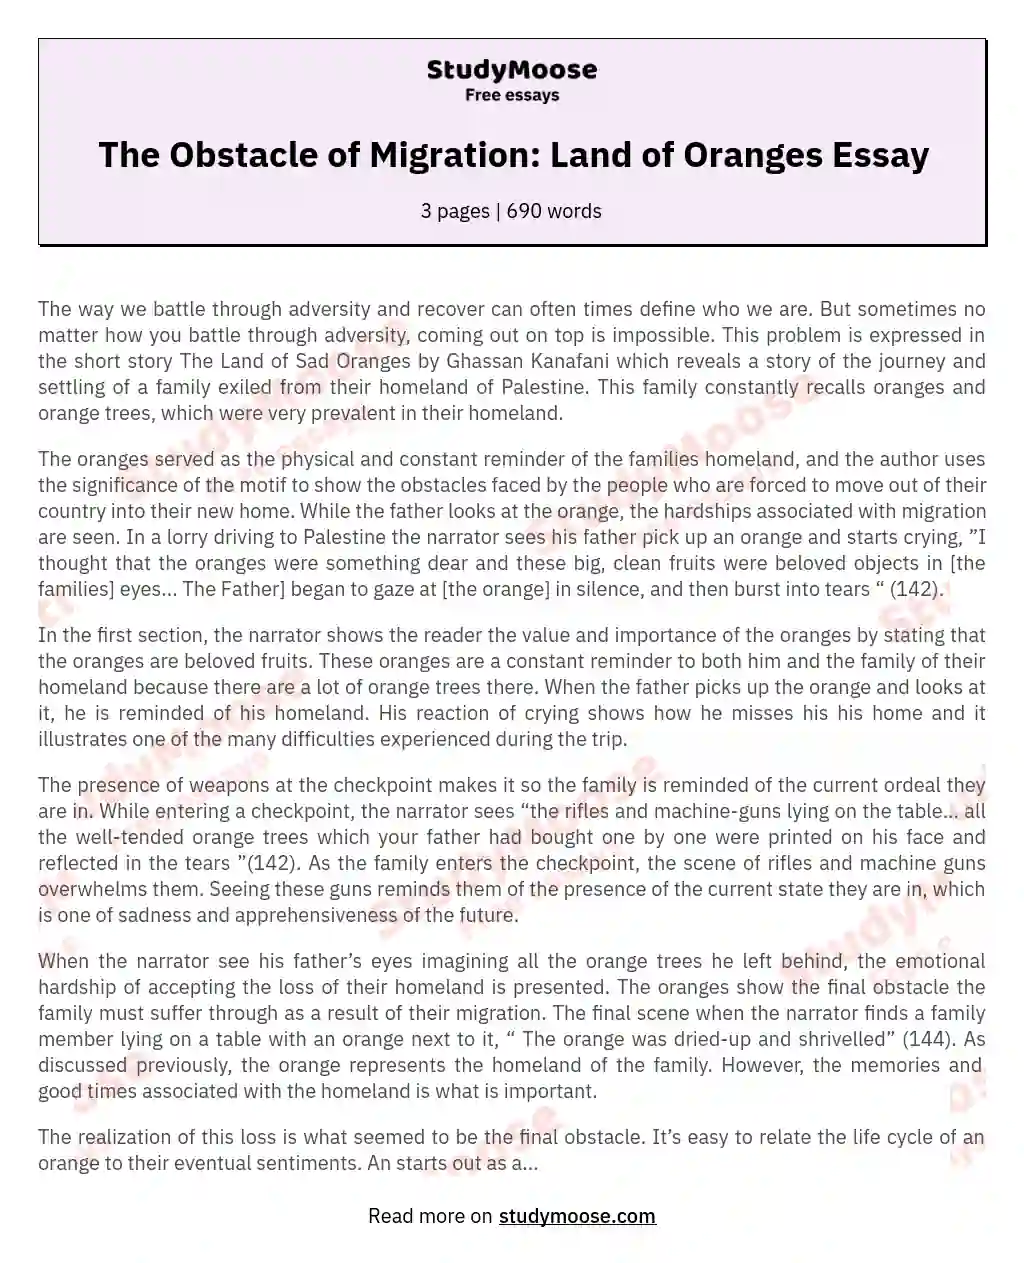 The Obstacle of Migration: Land of Oranges Essay